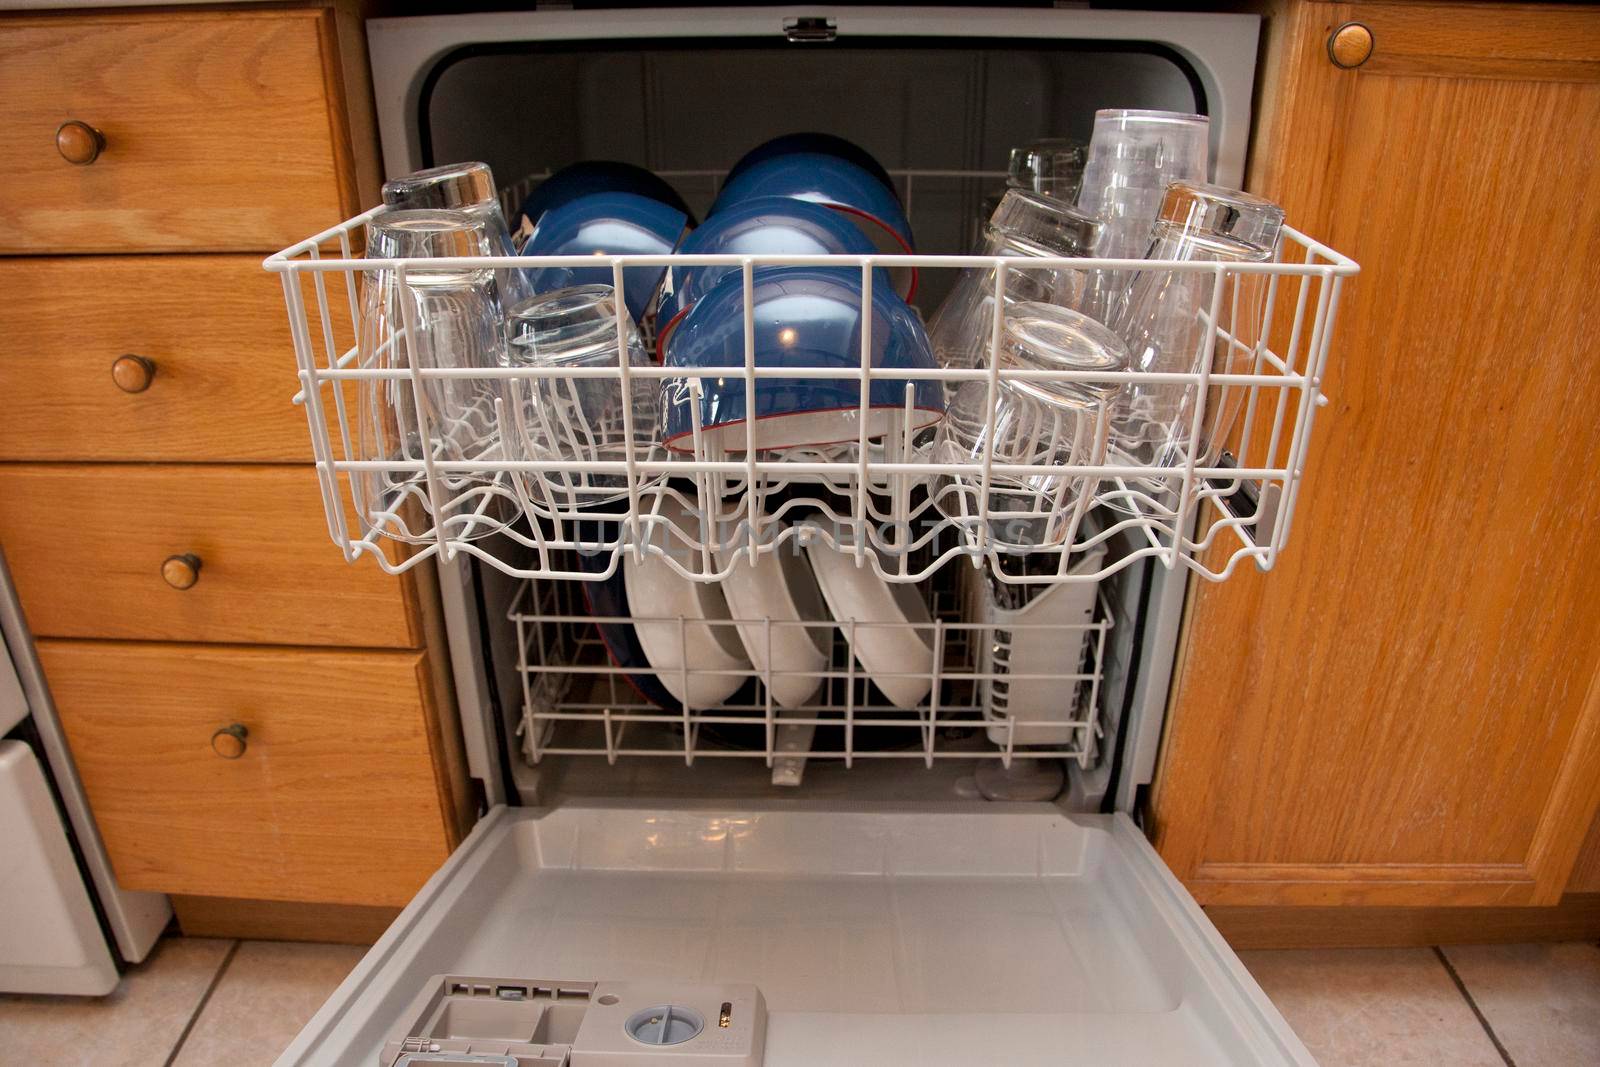 Full dishwasher in apartment  by rustycanuck